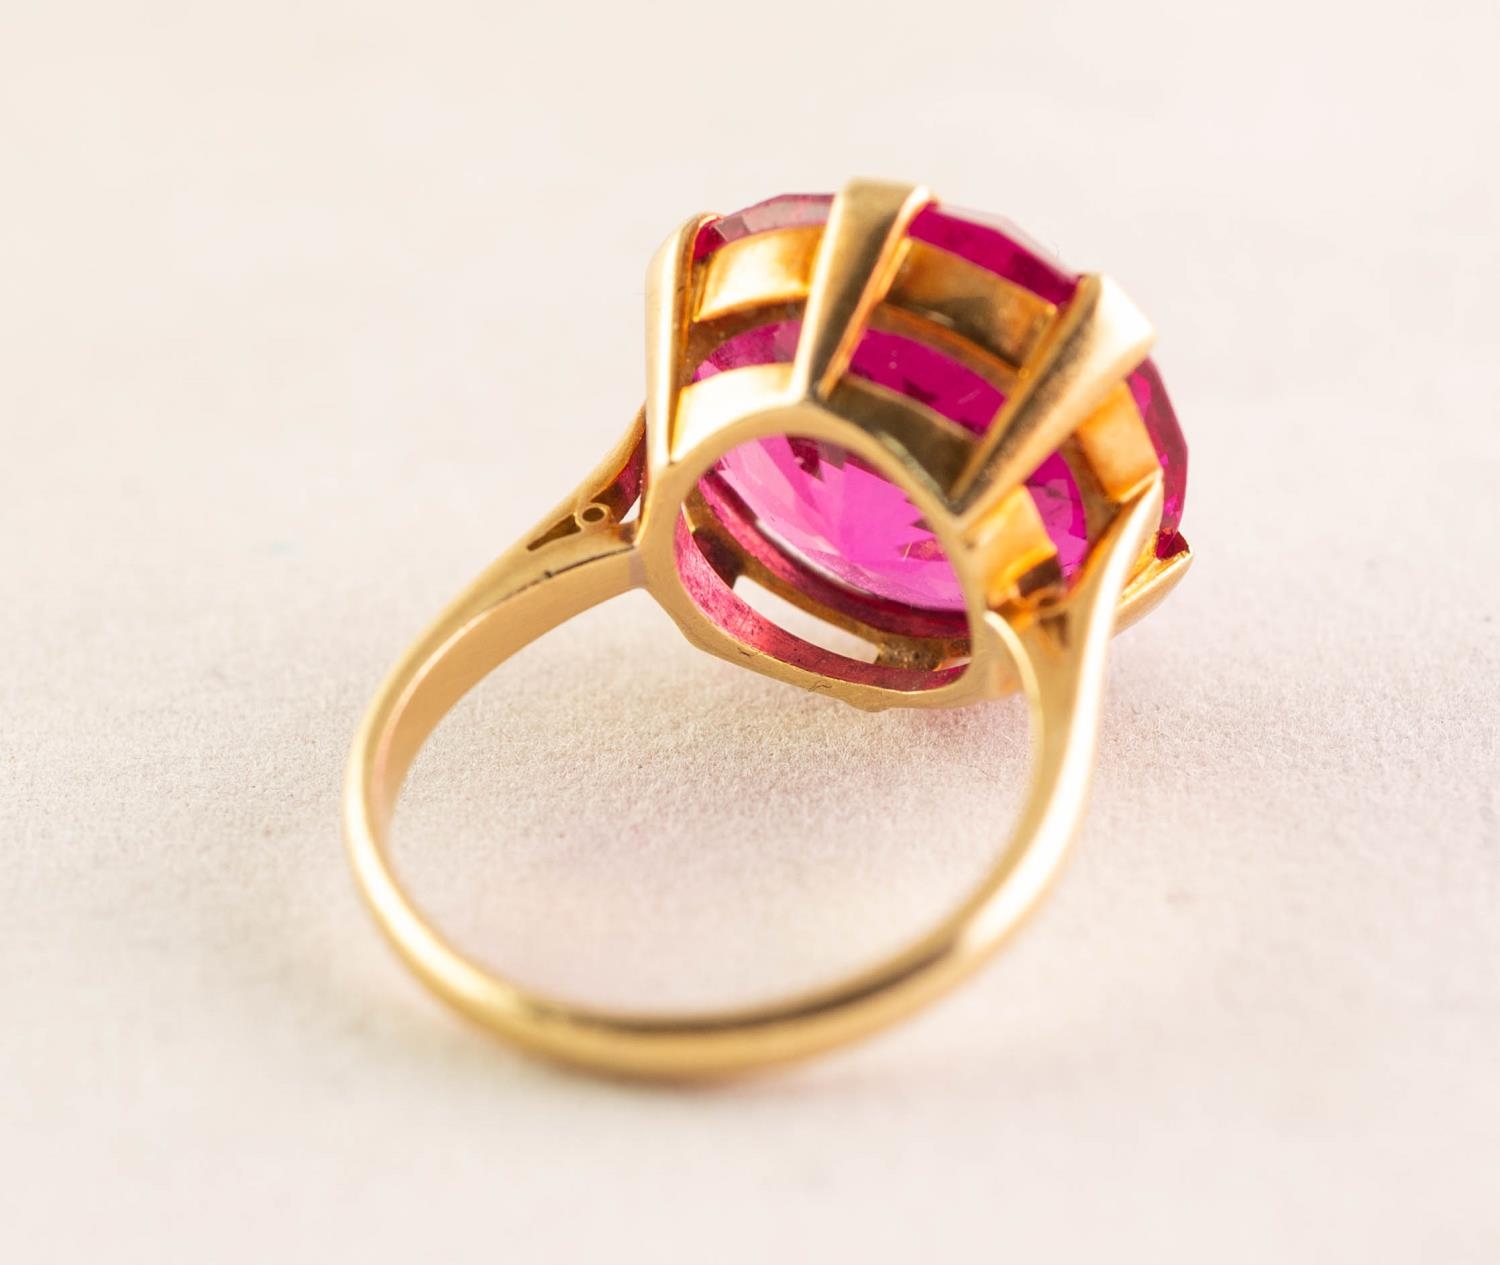 18ct GOLD DRESS RING SET WITH AN ATTRACTING AND LIVELY LARGE CIRCULAR PINK ZIRCON, 15mm diameter, - Image 4 of 4